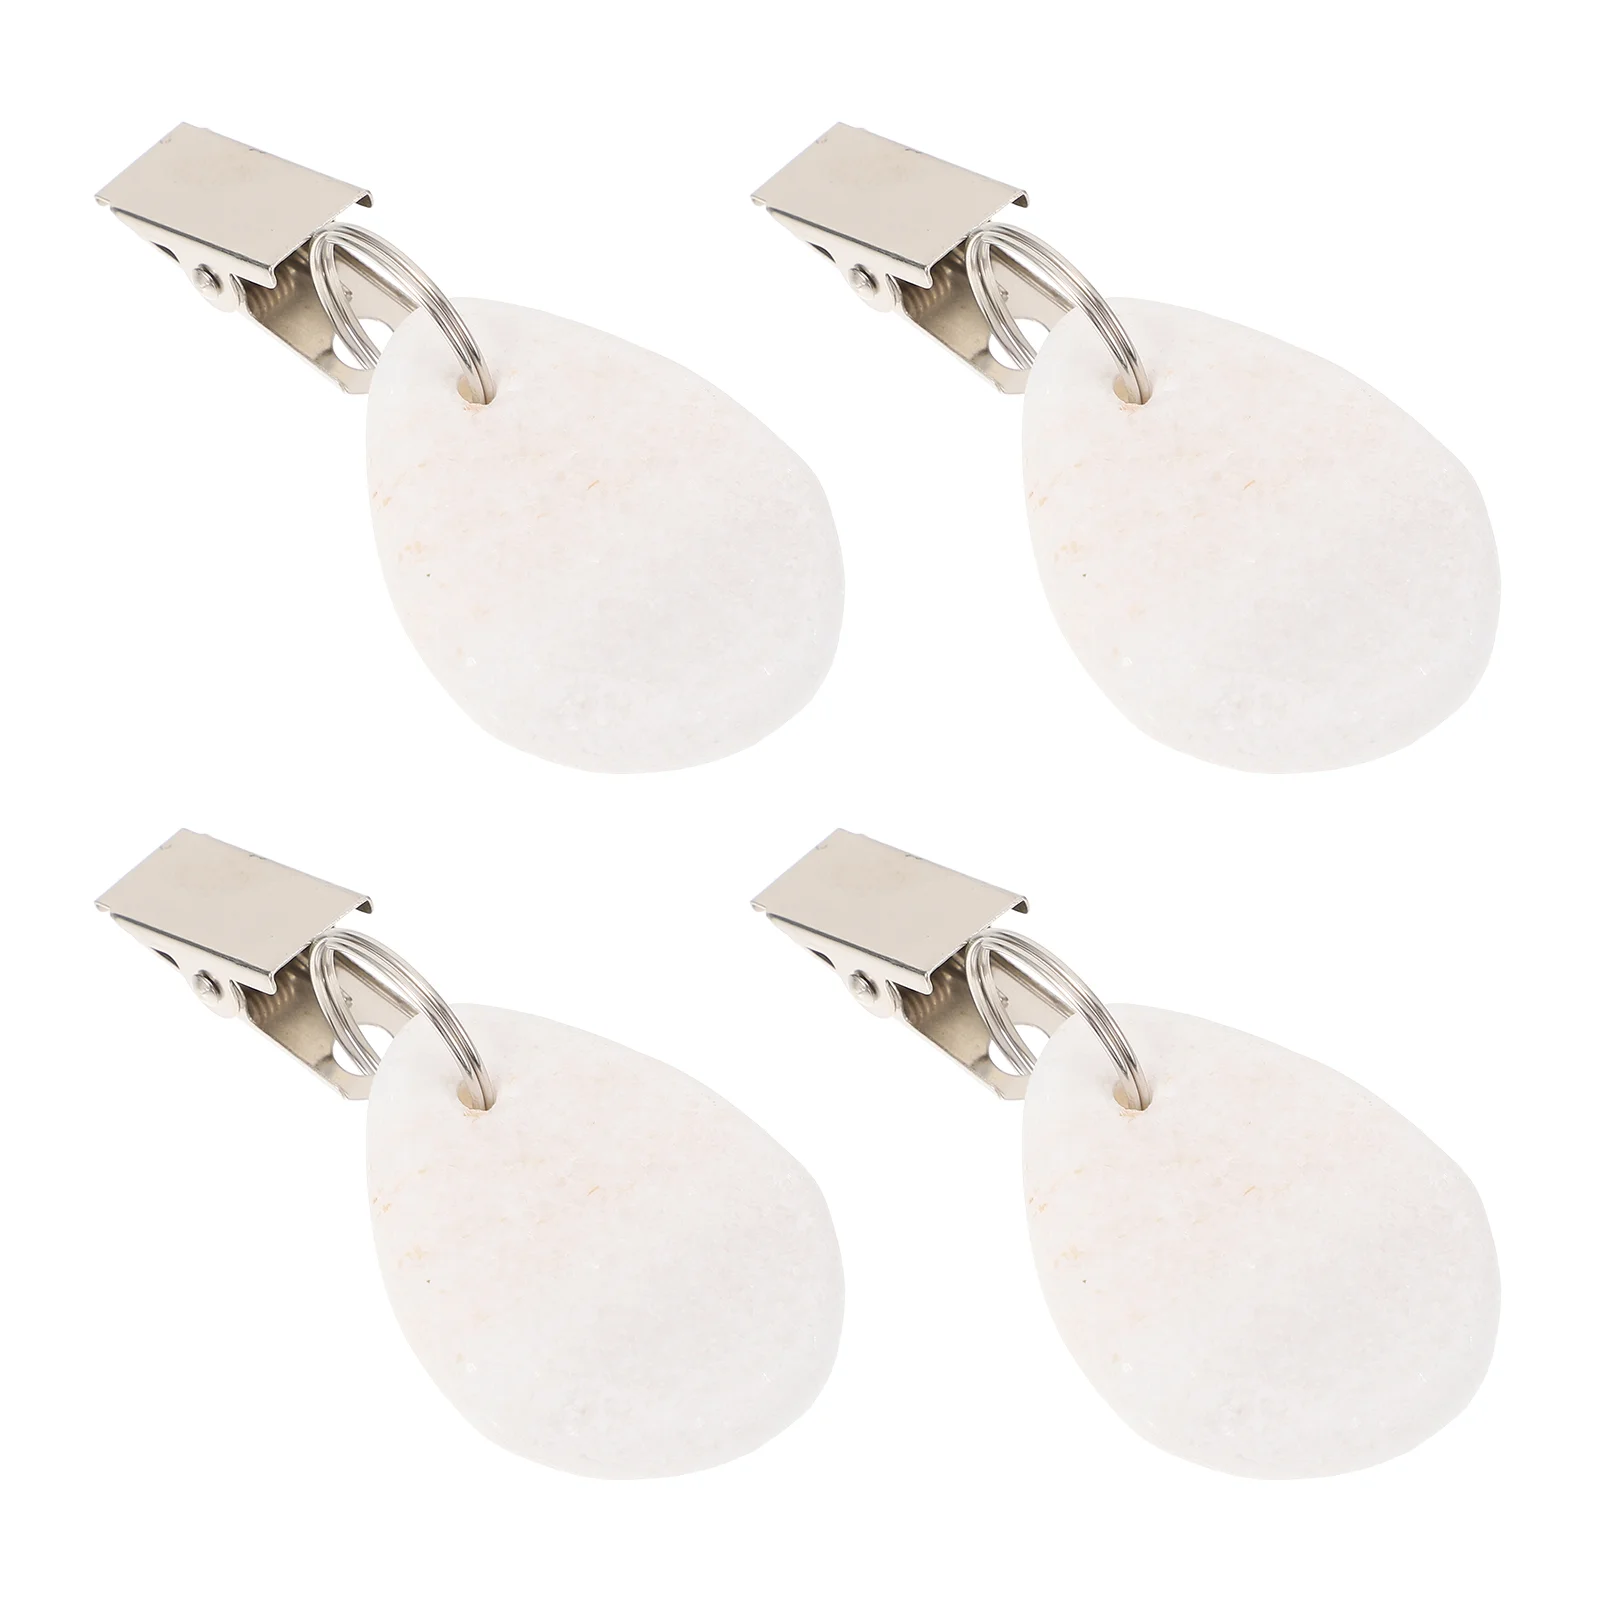 

4pcs Table Cover Weights Stone Table Weights Hangers with Metal Clip for Picnic Tables Tablecloth Weights Charm Pendant